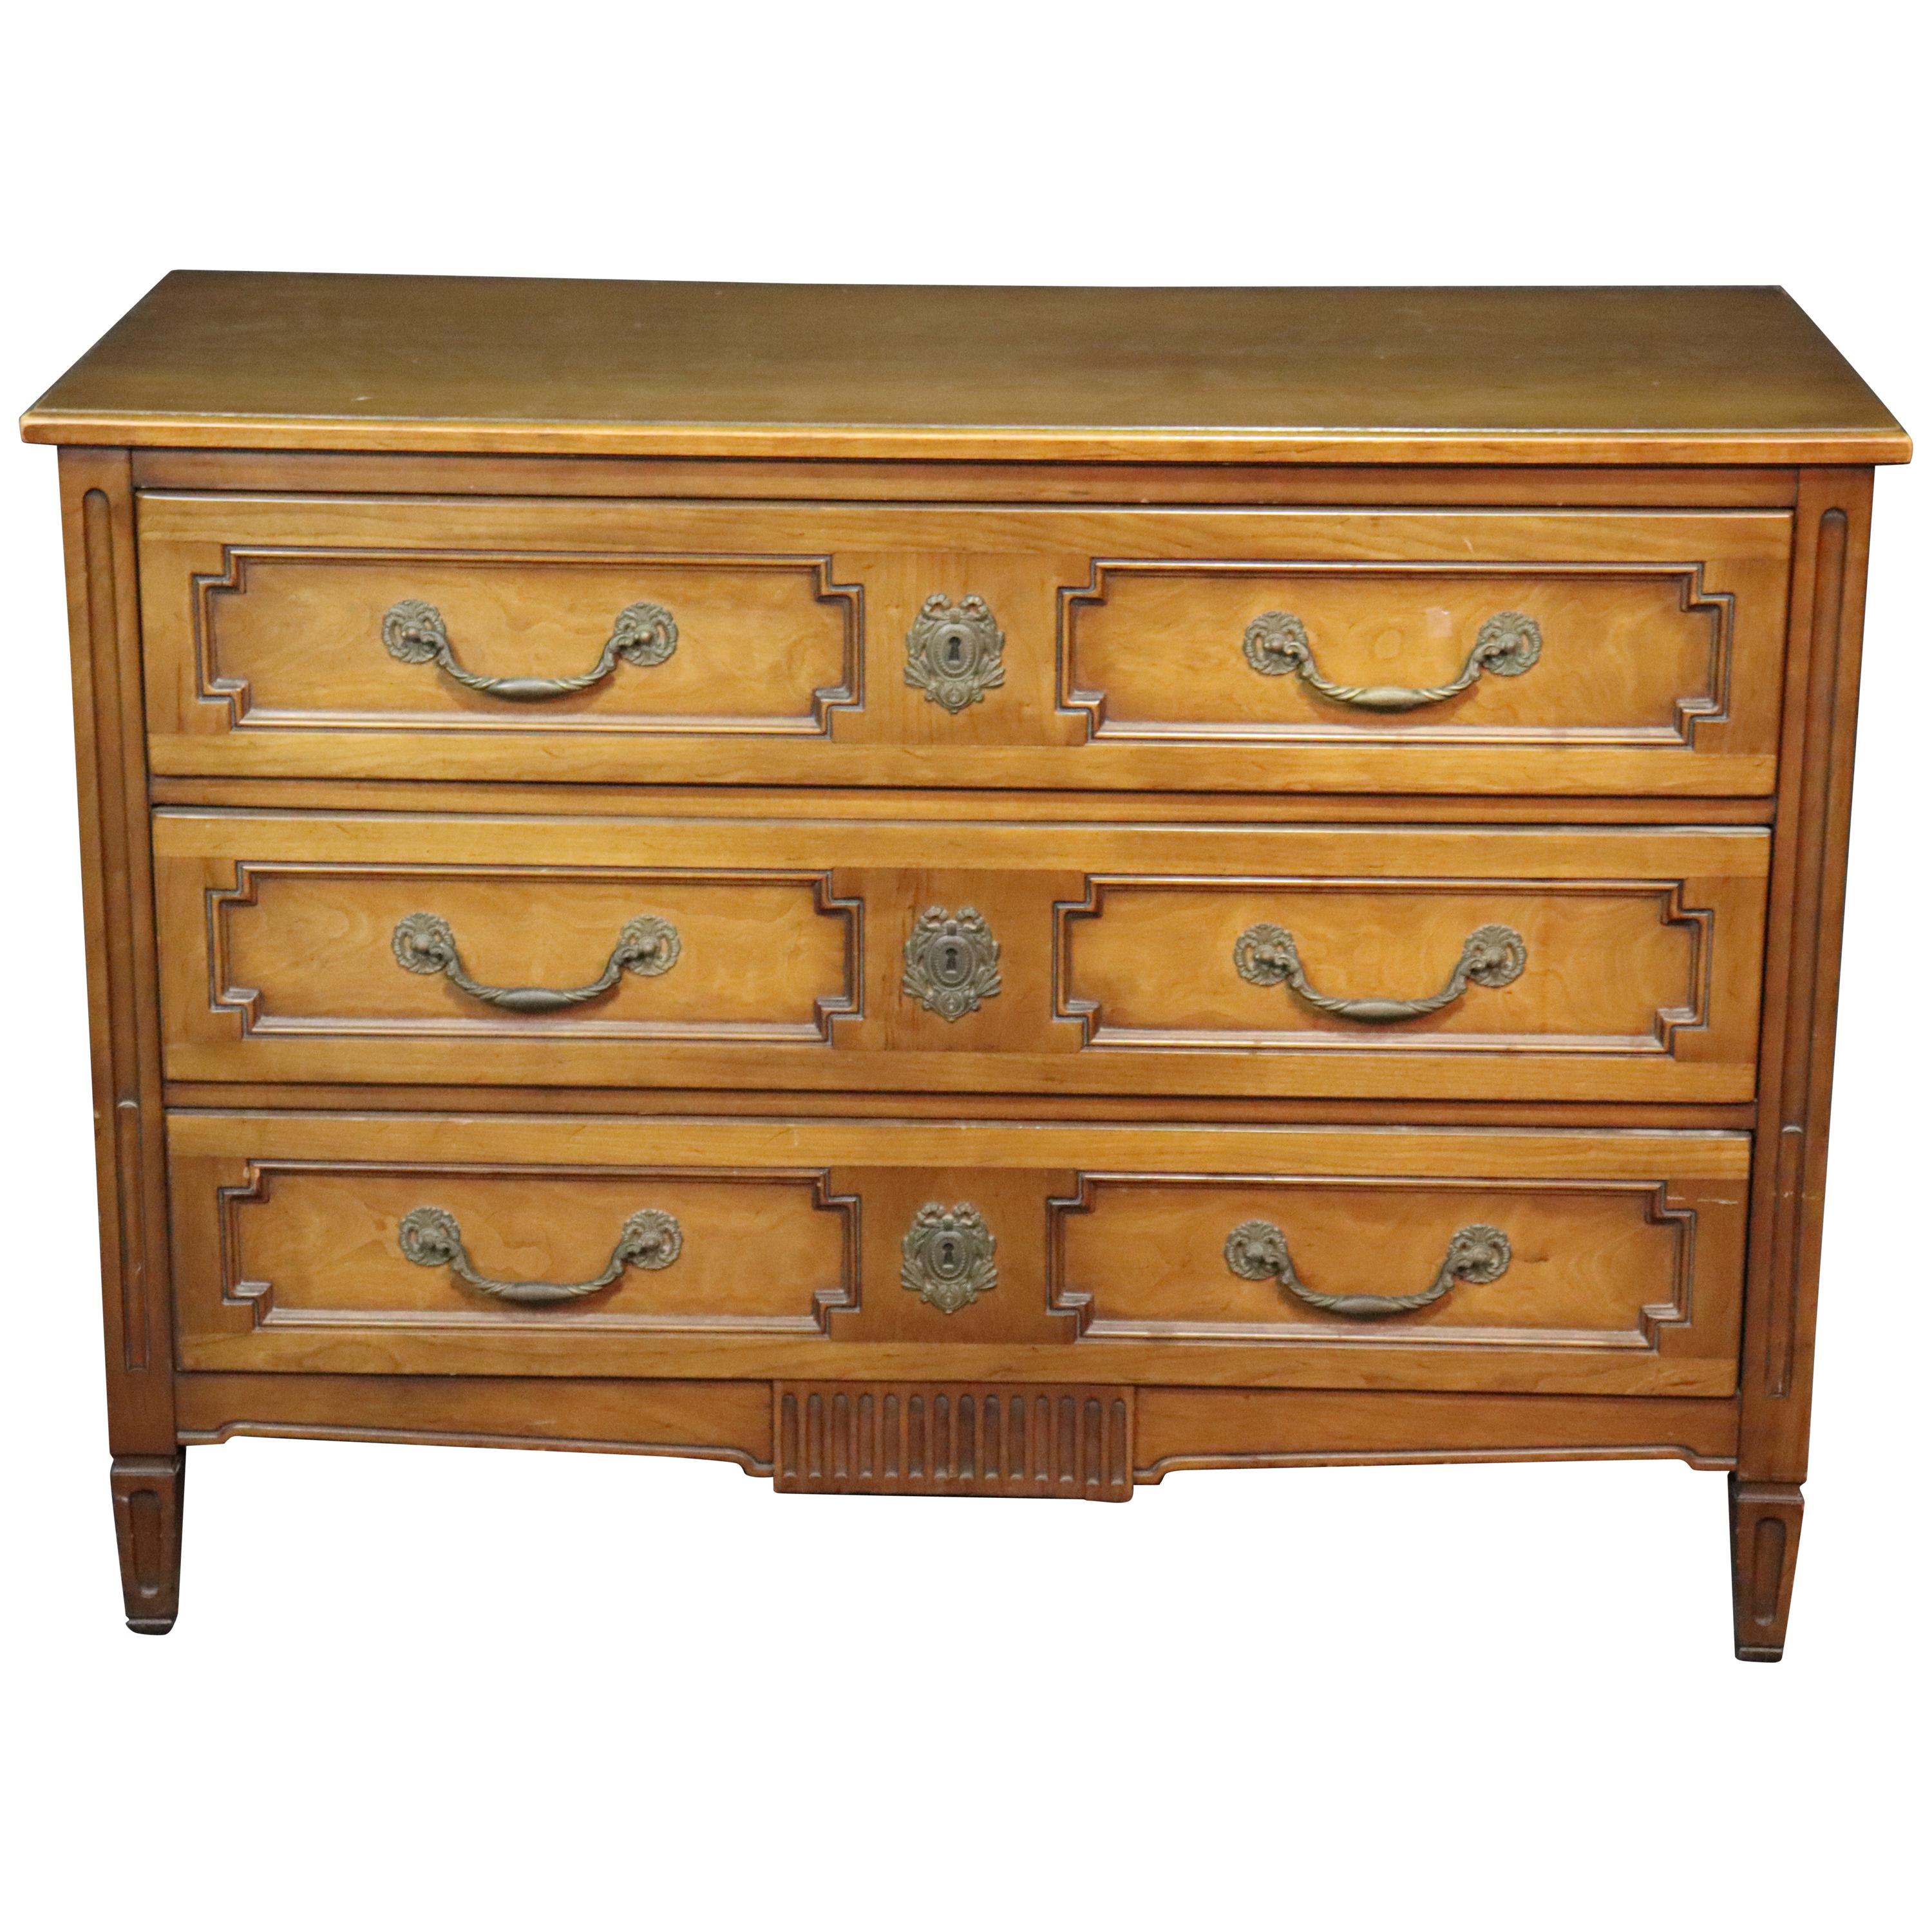 Solid Cherry French Louis XVI Style Dresser Commode Chest by Henredon C1950